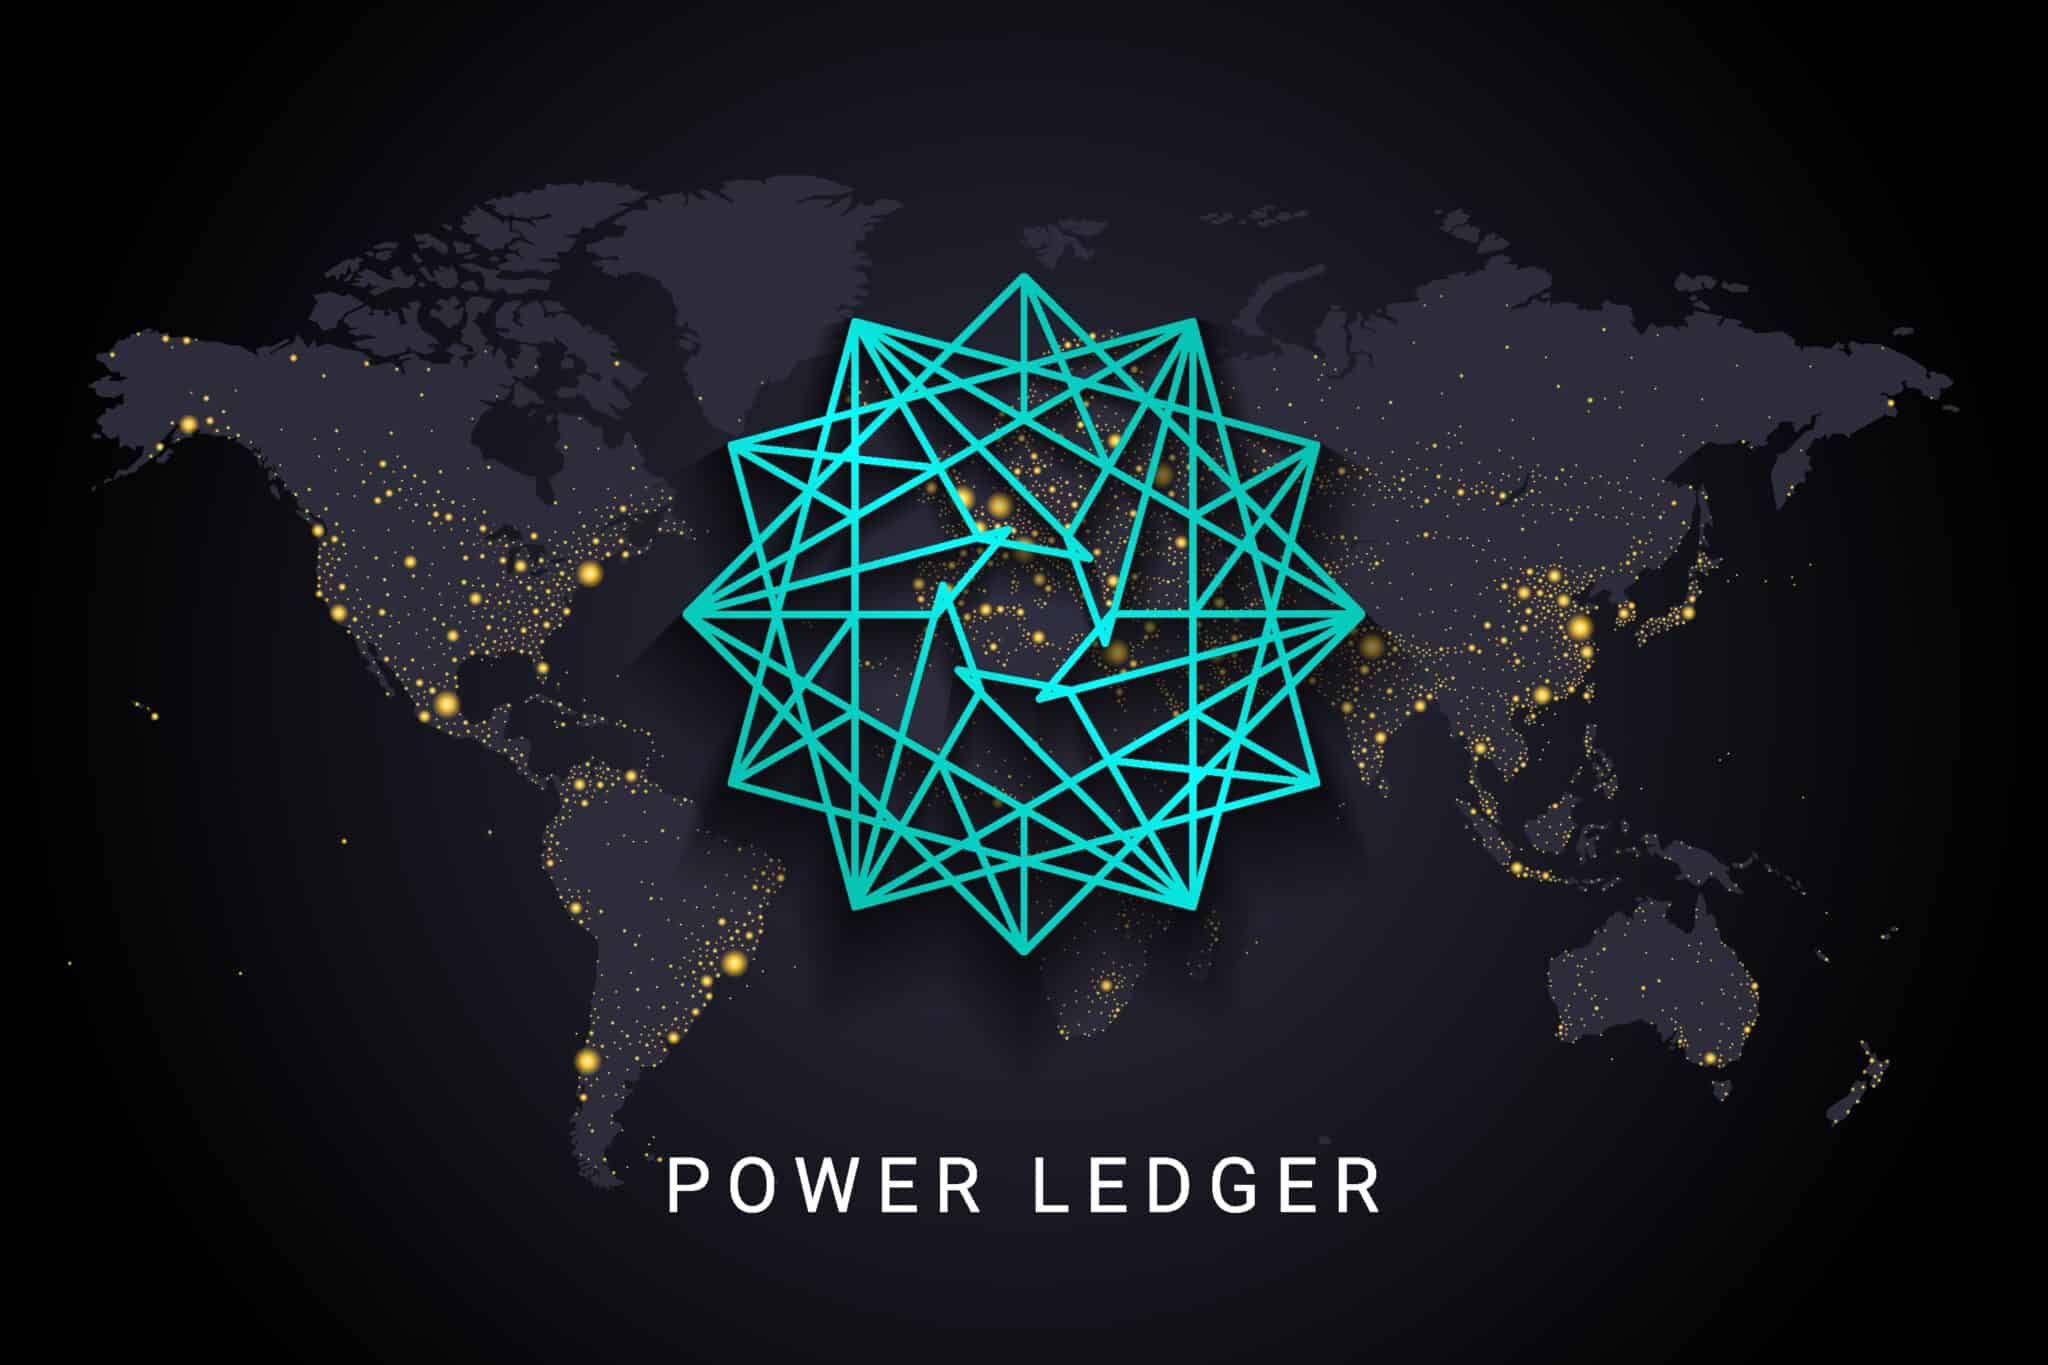 17-astonishing-facts-about-power-ledger-powr